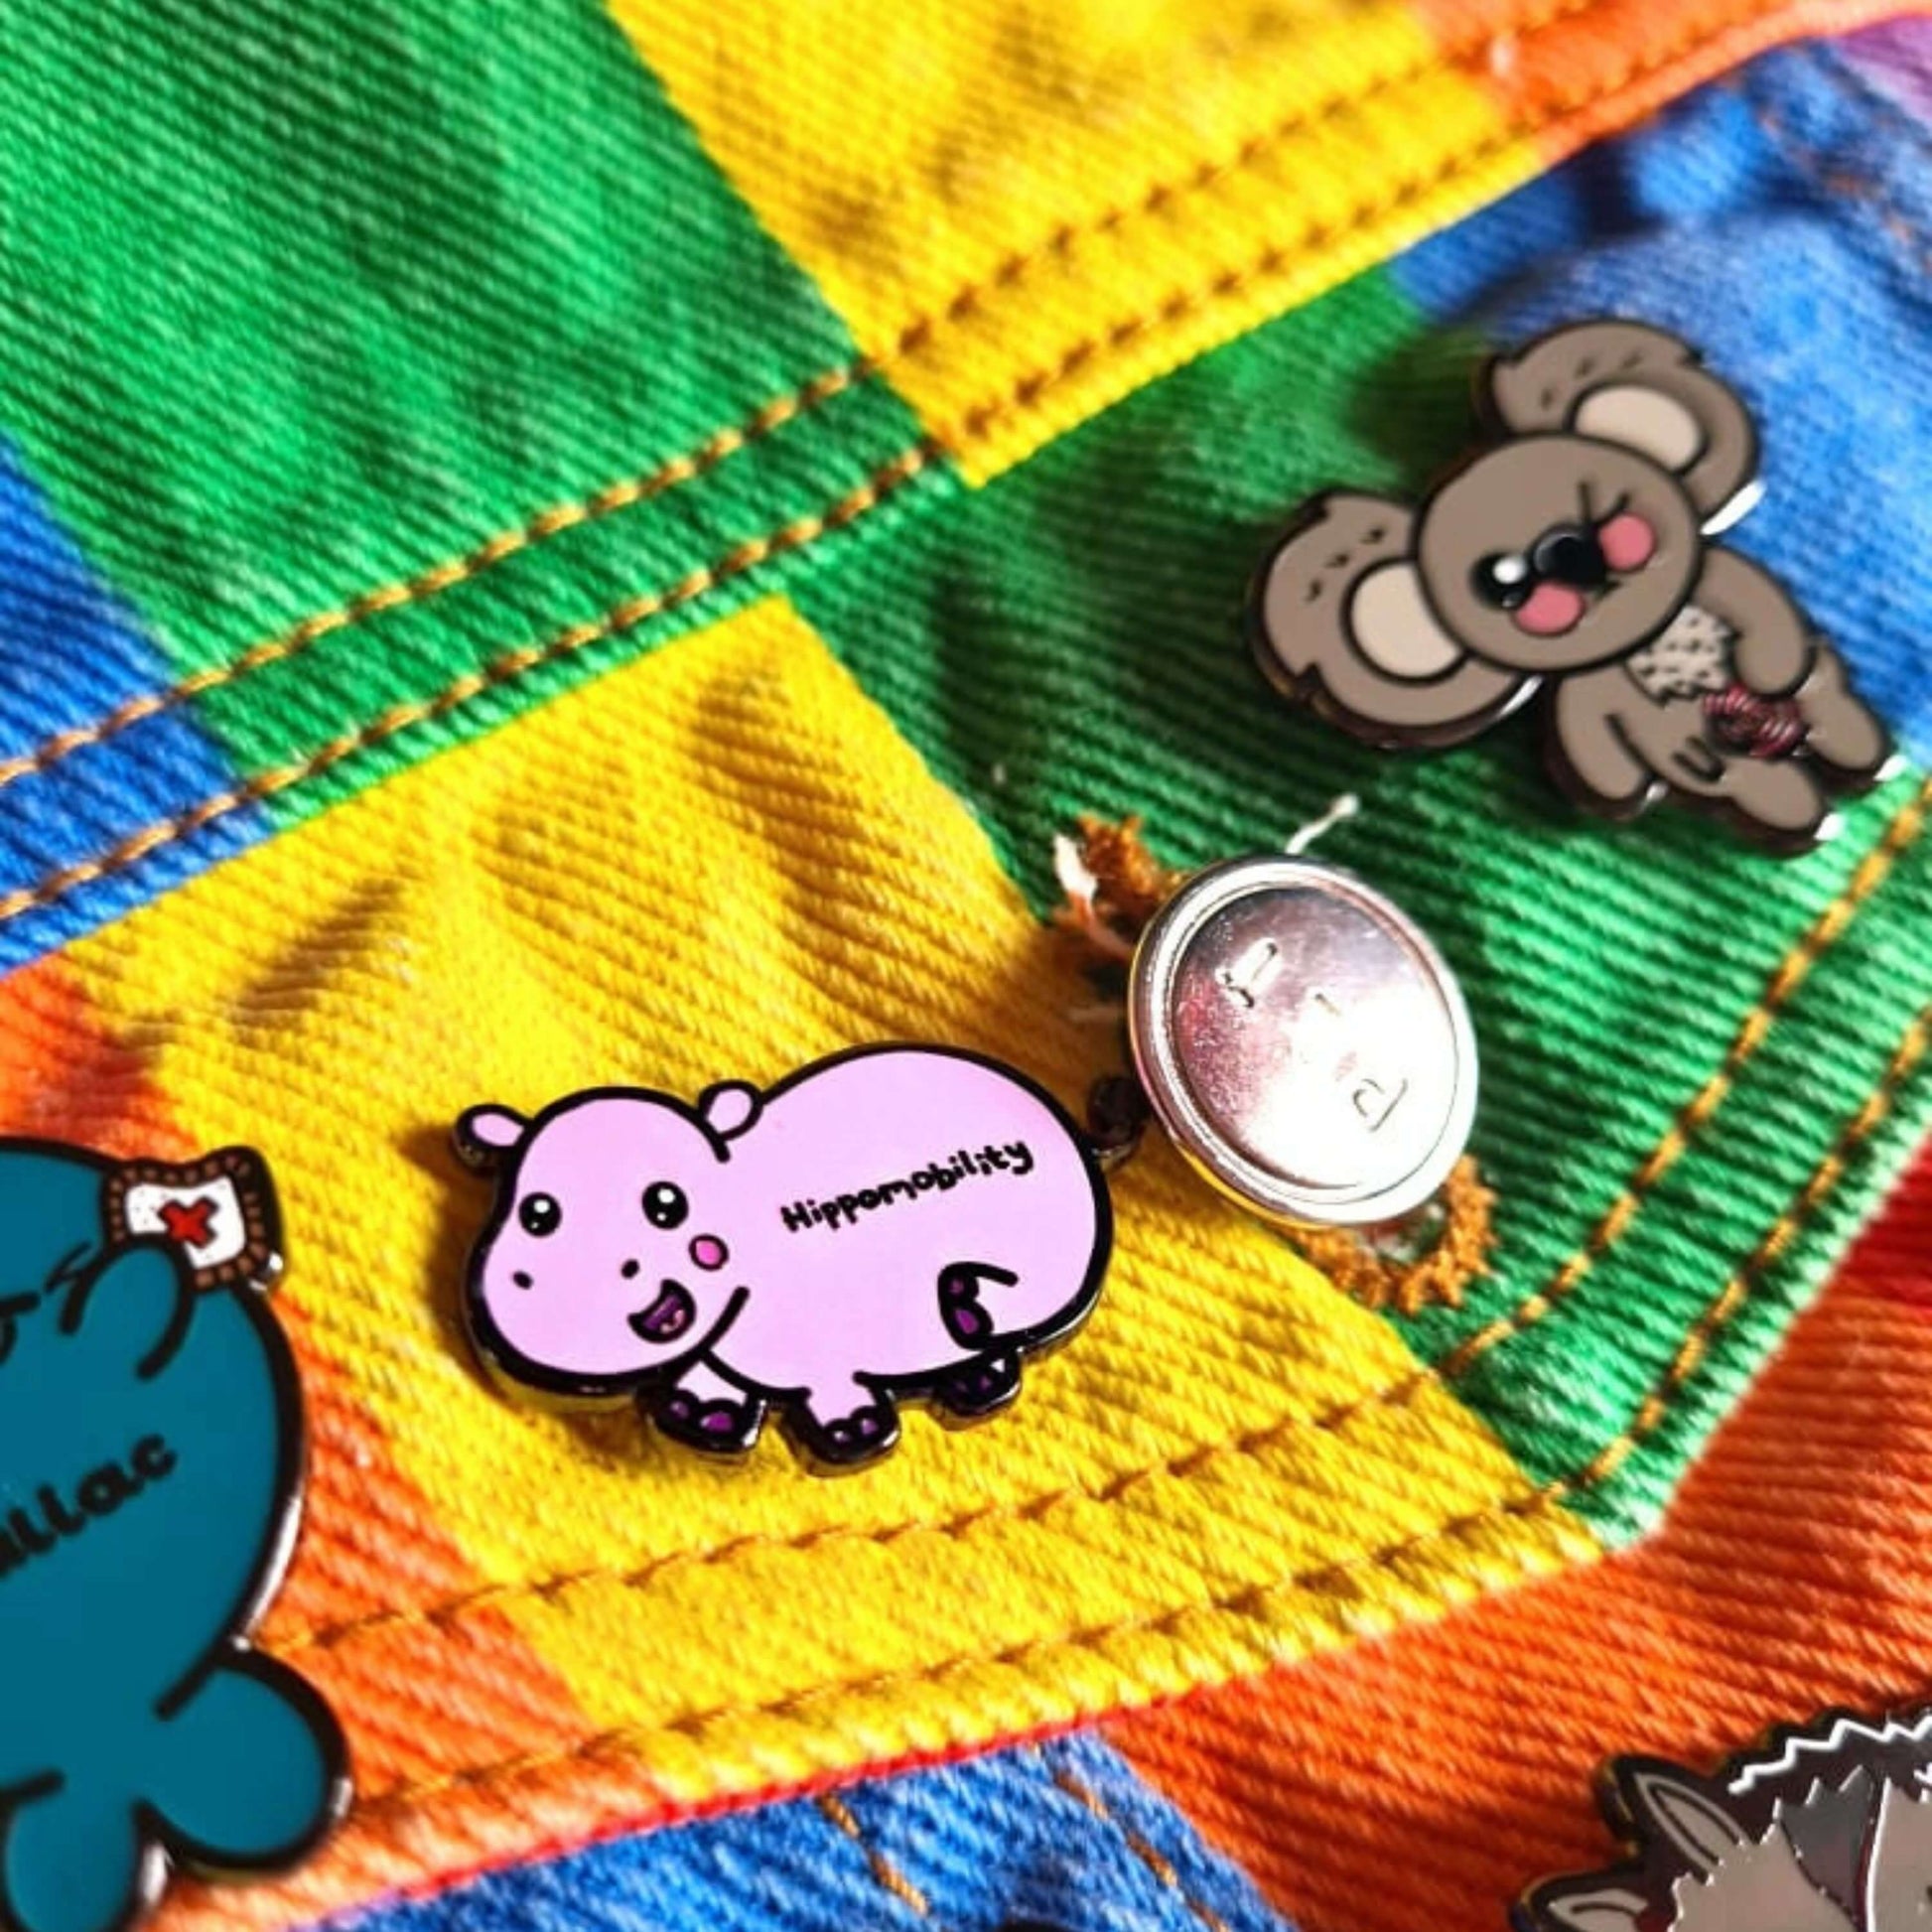 Hippmobility Enamel Pin - Hyper Mobility pinned on a rainbow denim jacket with other innabox enamel pins. The enamel pin is of a pink happy hippo with the text hippomobility written on its stomach. The enamel pin is designed to raise awareness for hyper mobility